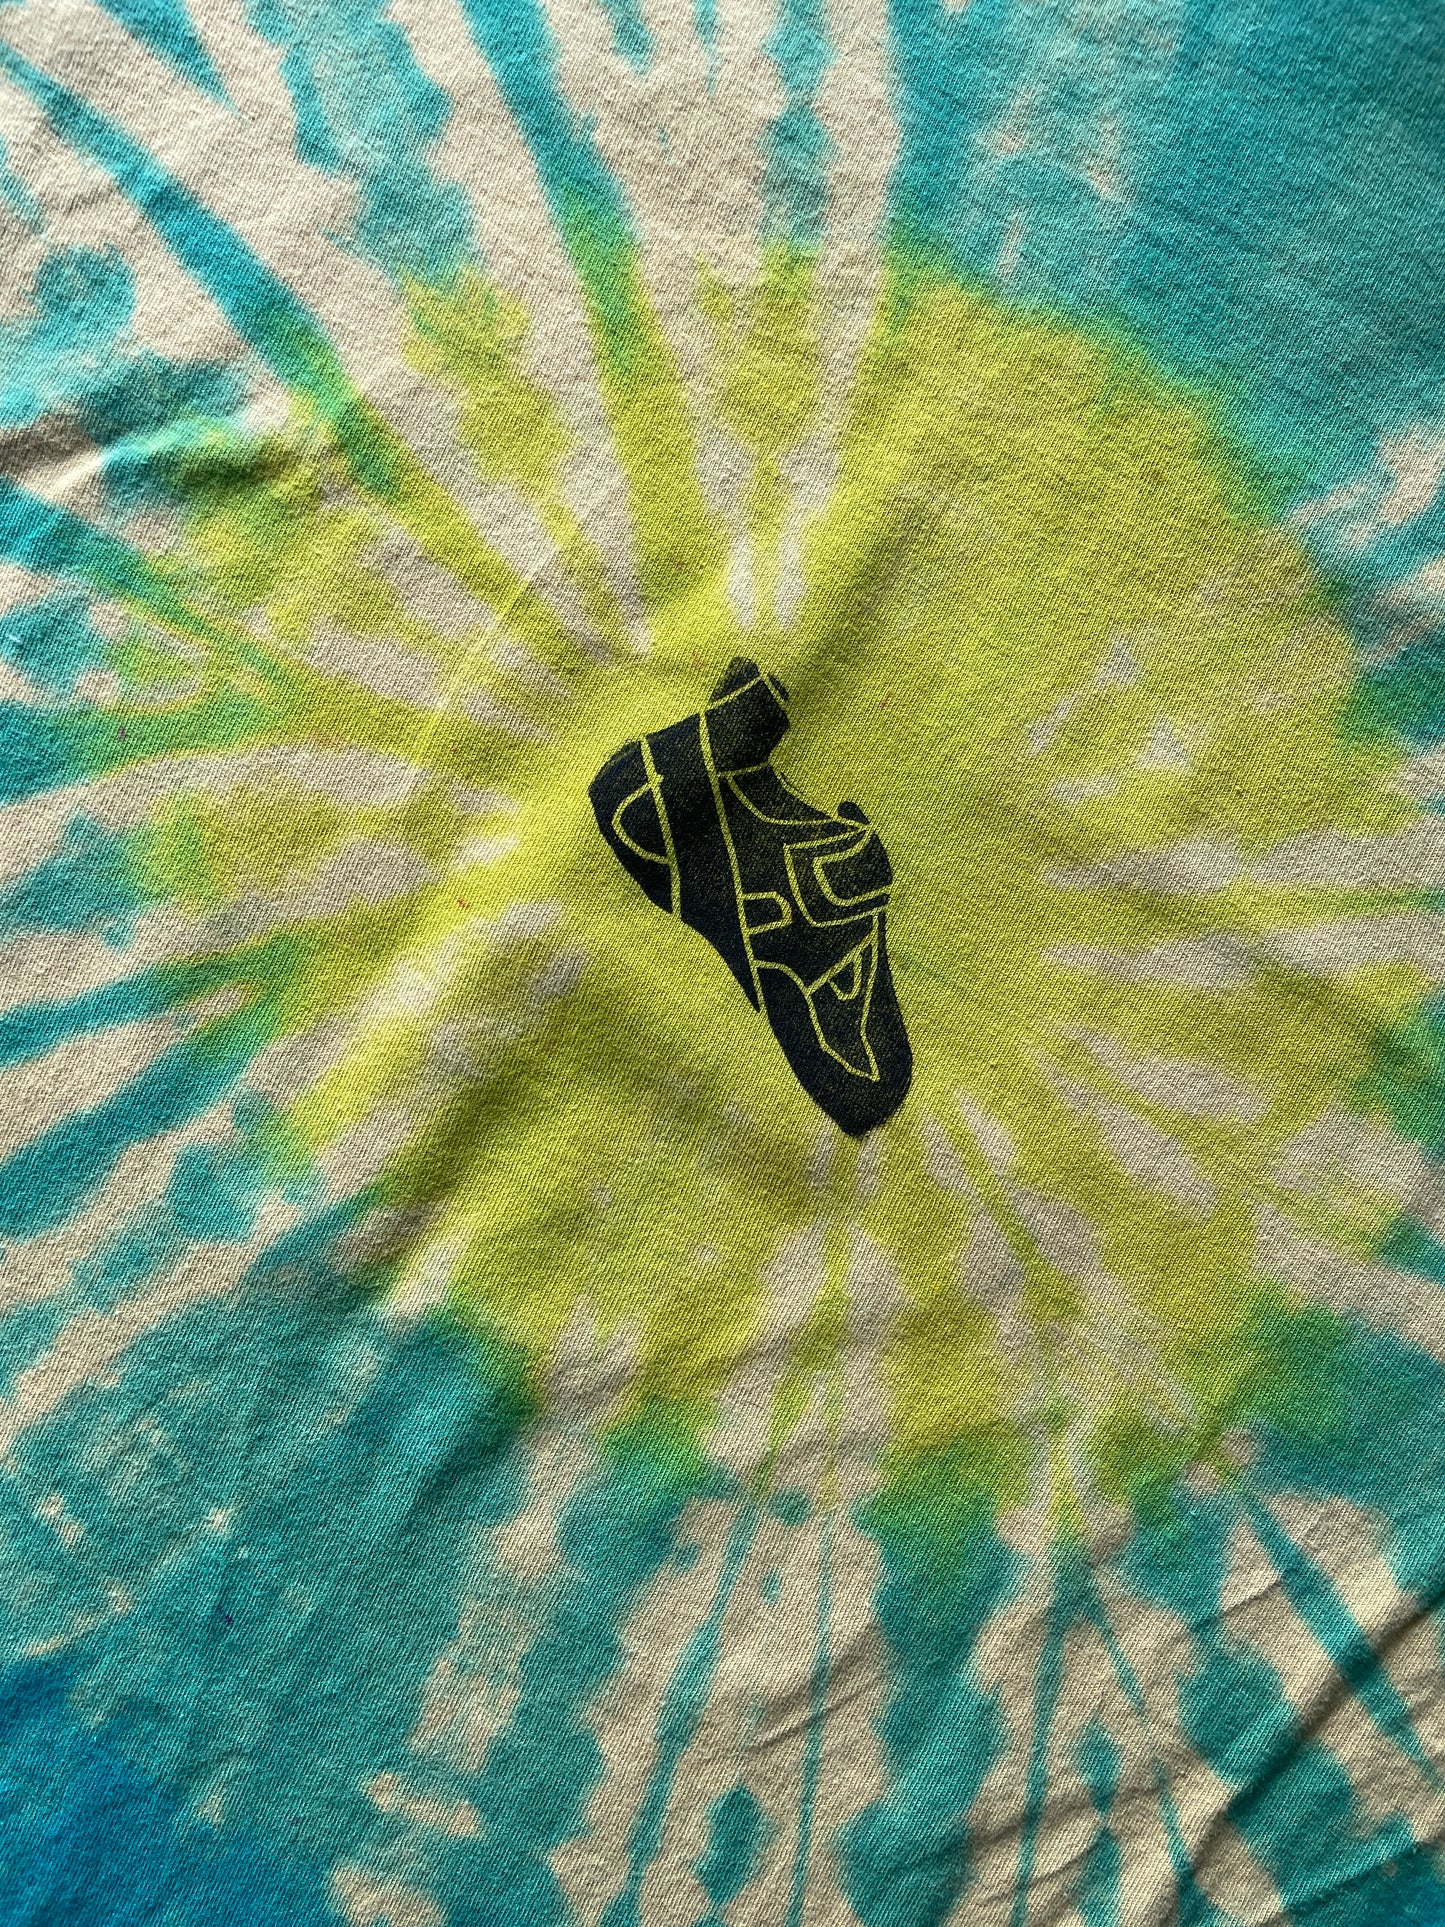 LARGE Men’s Climbing Shoe Handmade Tie Dyed T-Shirt | One-Of-a-Kind Yellow, Blue, and Green Pleated Short Sleeve